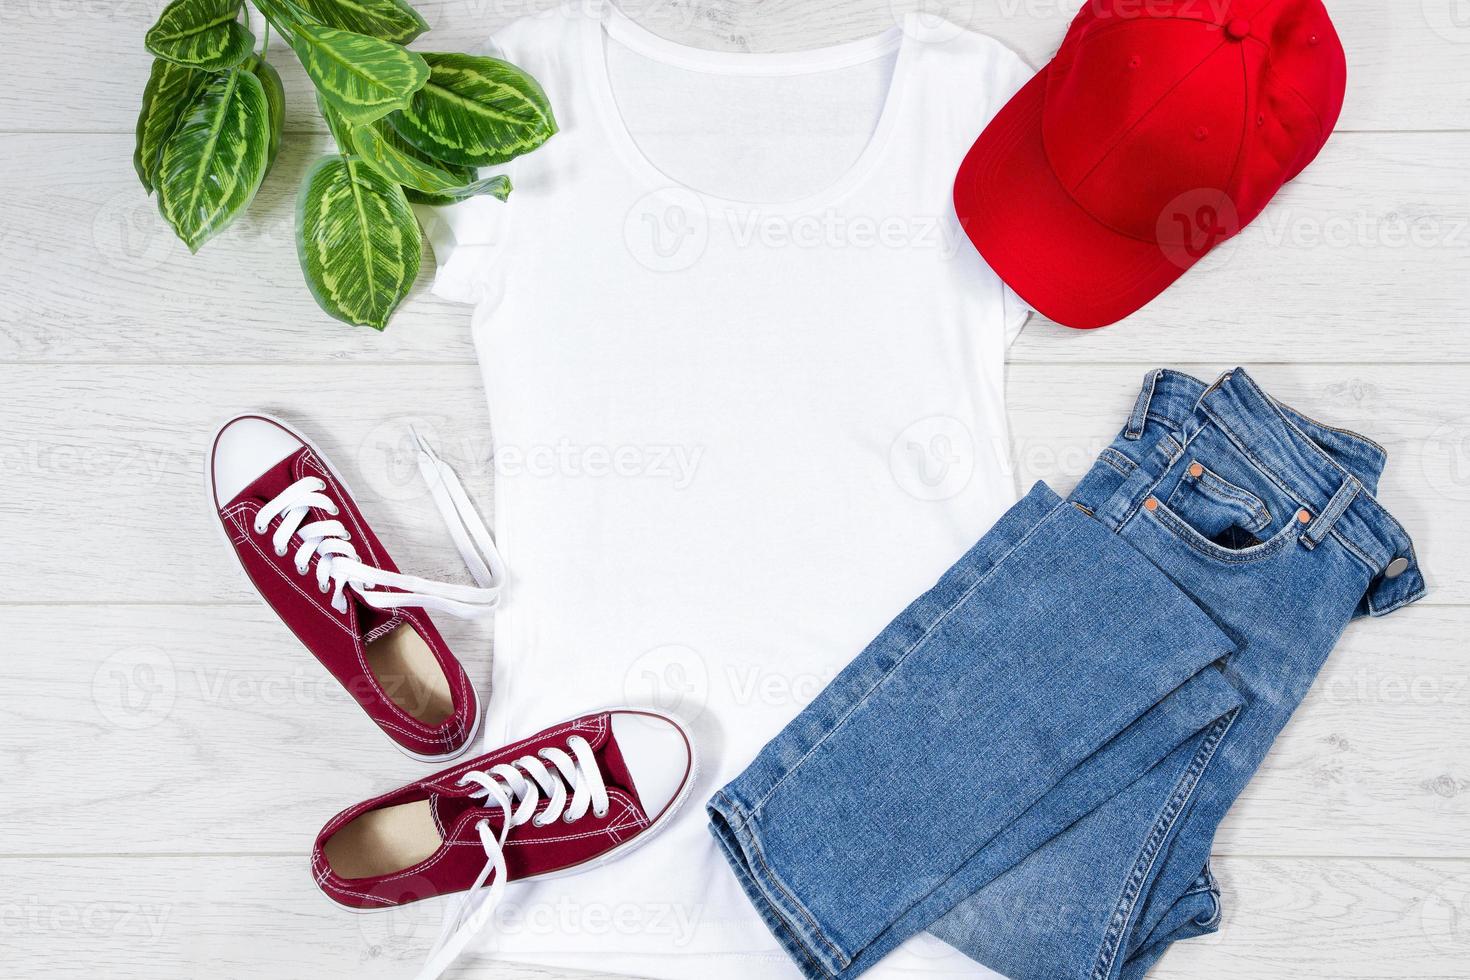 T shirt white and sneakers. T-shirt Mockup flat lay with summer accessories. Baseball Hat, bag, yellow flip flops on wooden floor background. Copy space. Template blank canvas. Front top view. photo